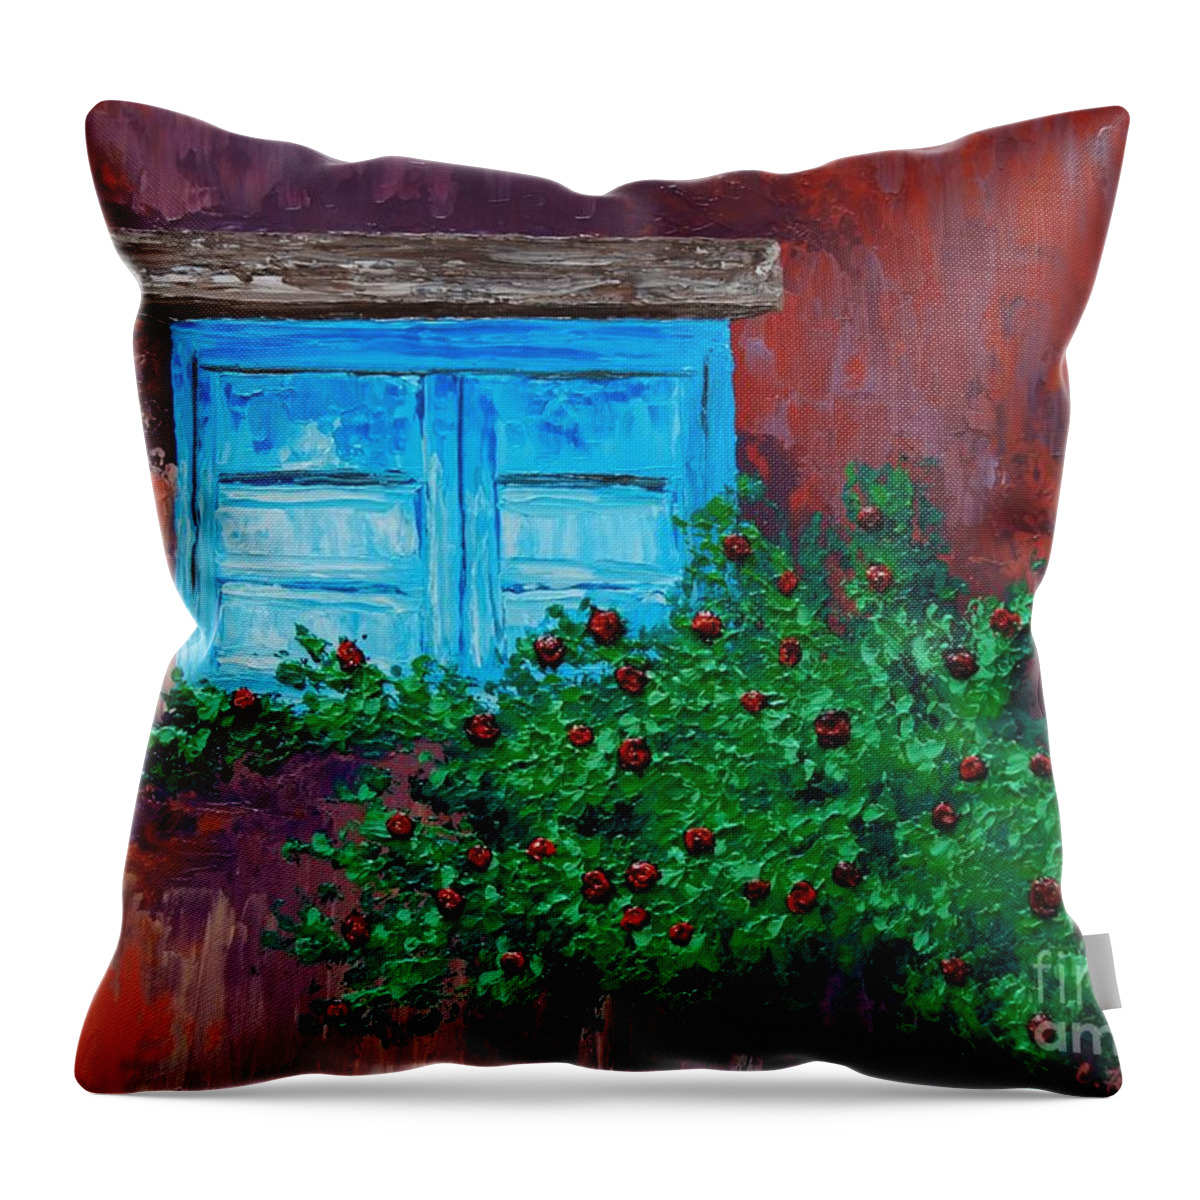 Roses Throw Pillow featuring the painting Climbing Roses by Cheryl Fecht